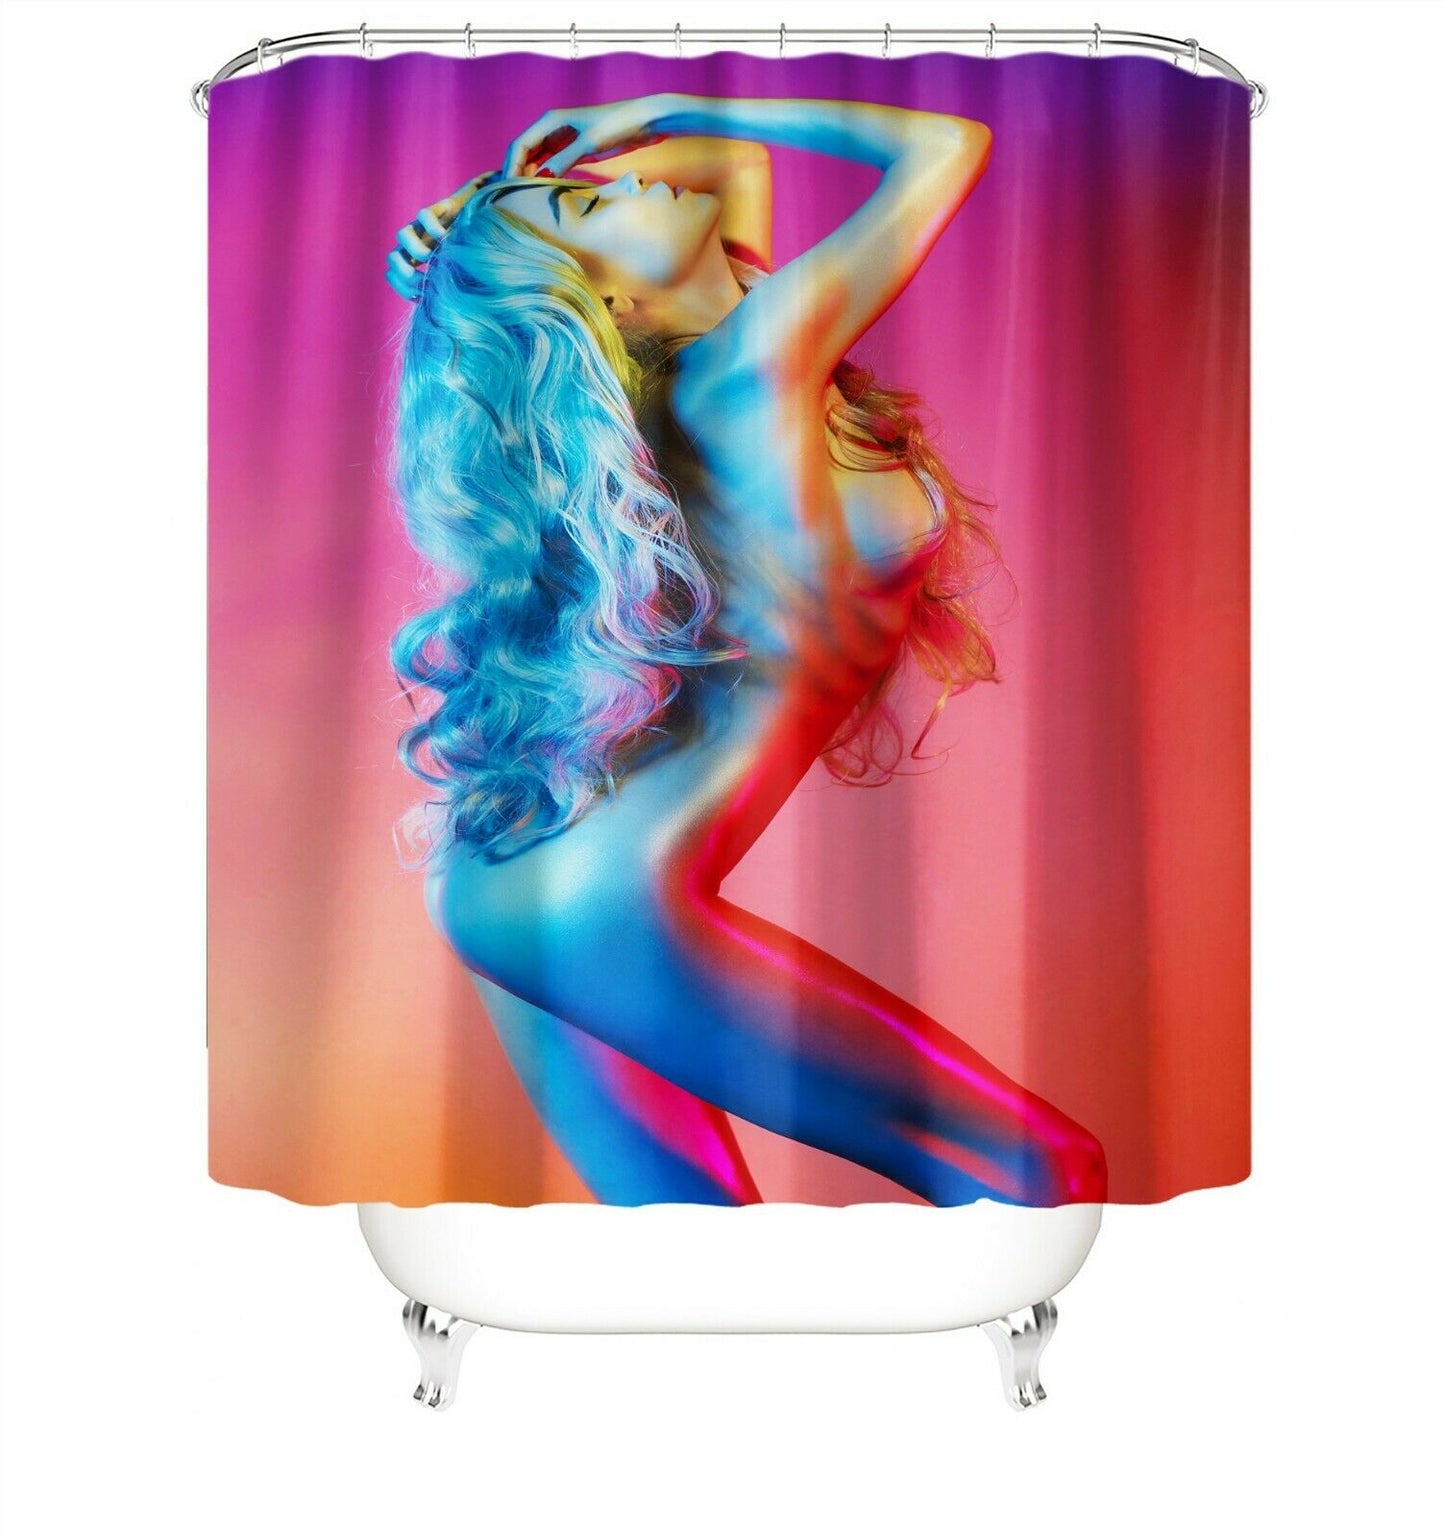 Sexy Woman Shower Curtain Bathroom Rug Set Non-Slip Bath Mat Toilet Lid Cover-180×180cm Shower Curtain Only-Free Shipping at meselling99